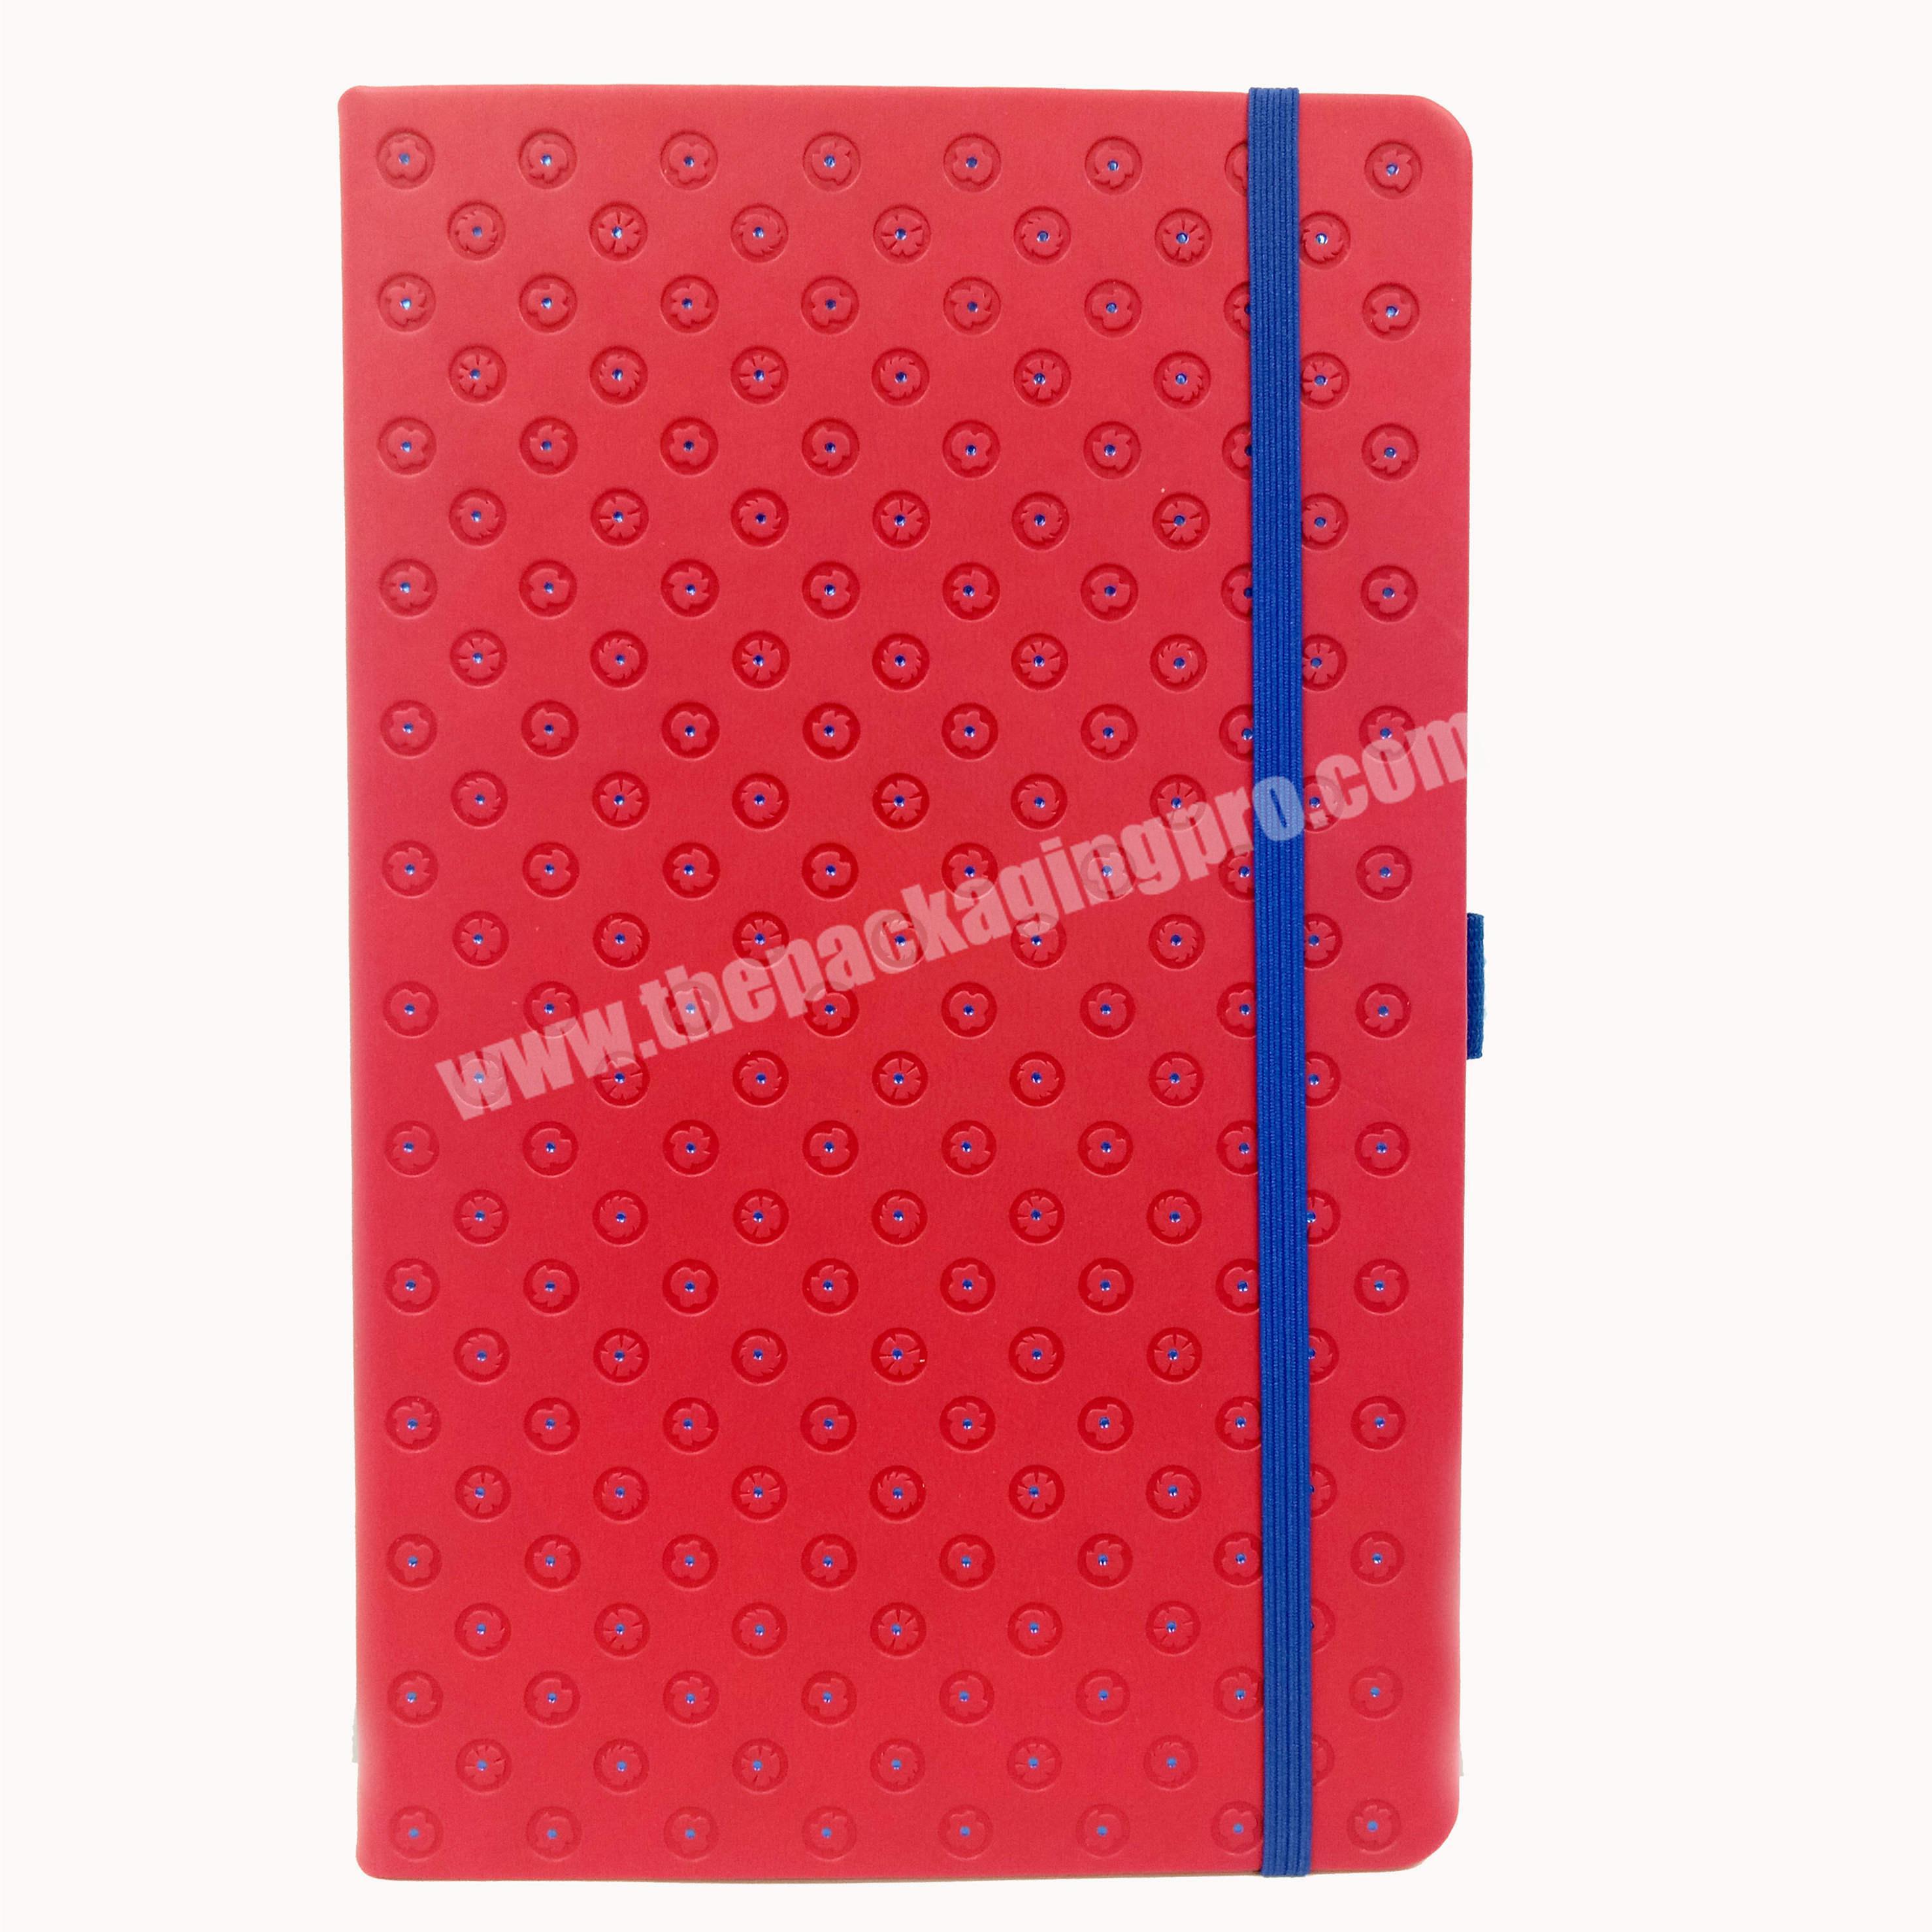 Wholesale eco friendly notebook private planner business diary agenda